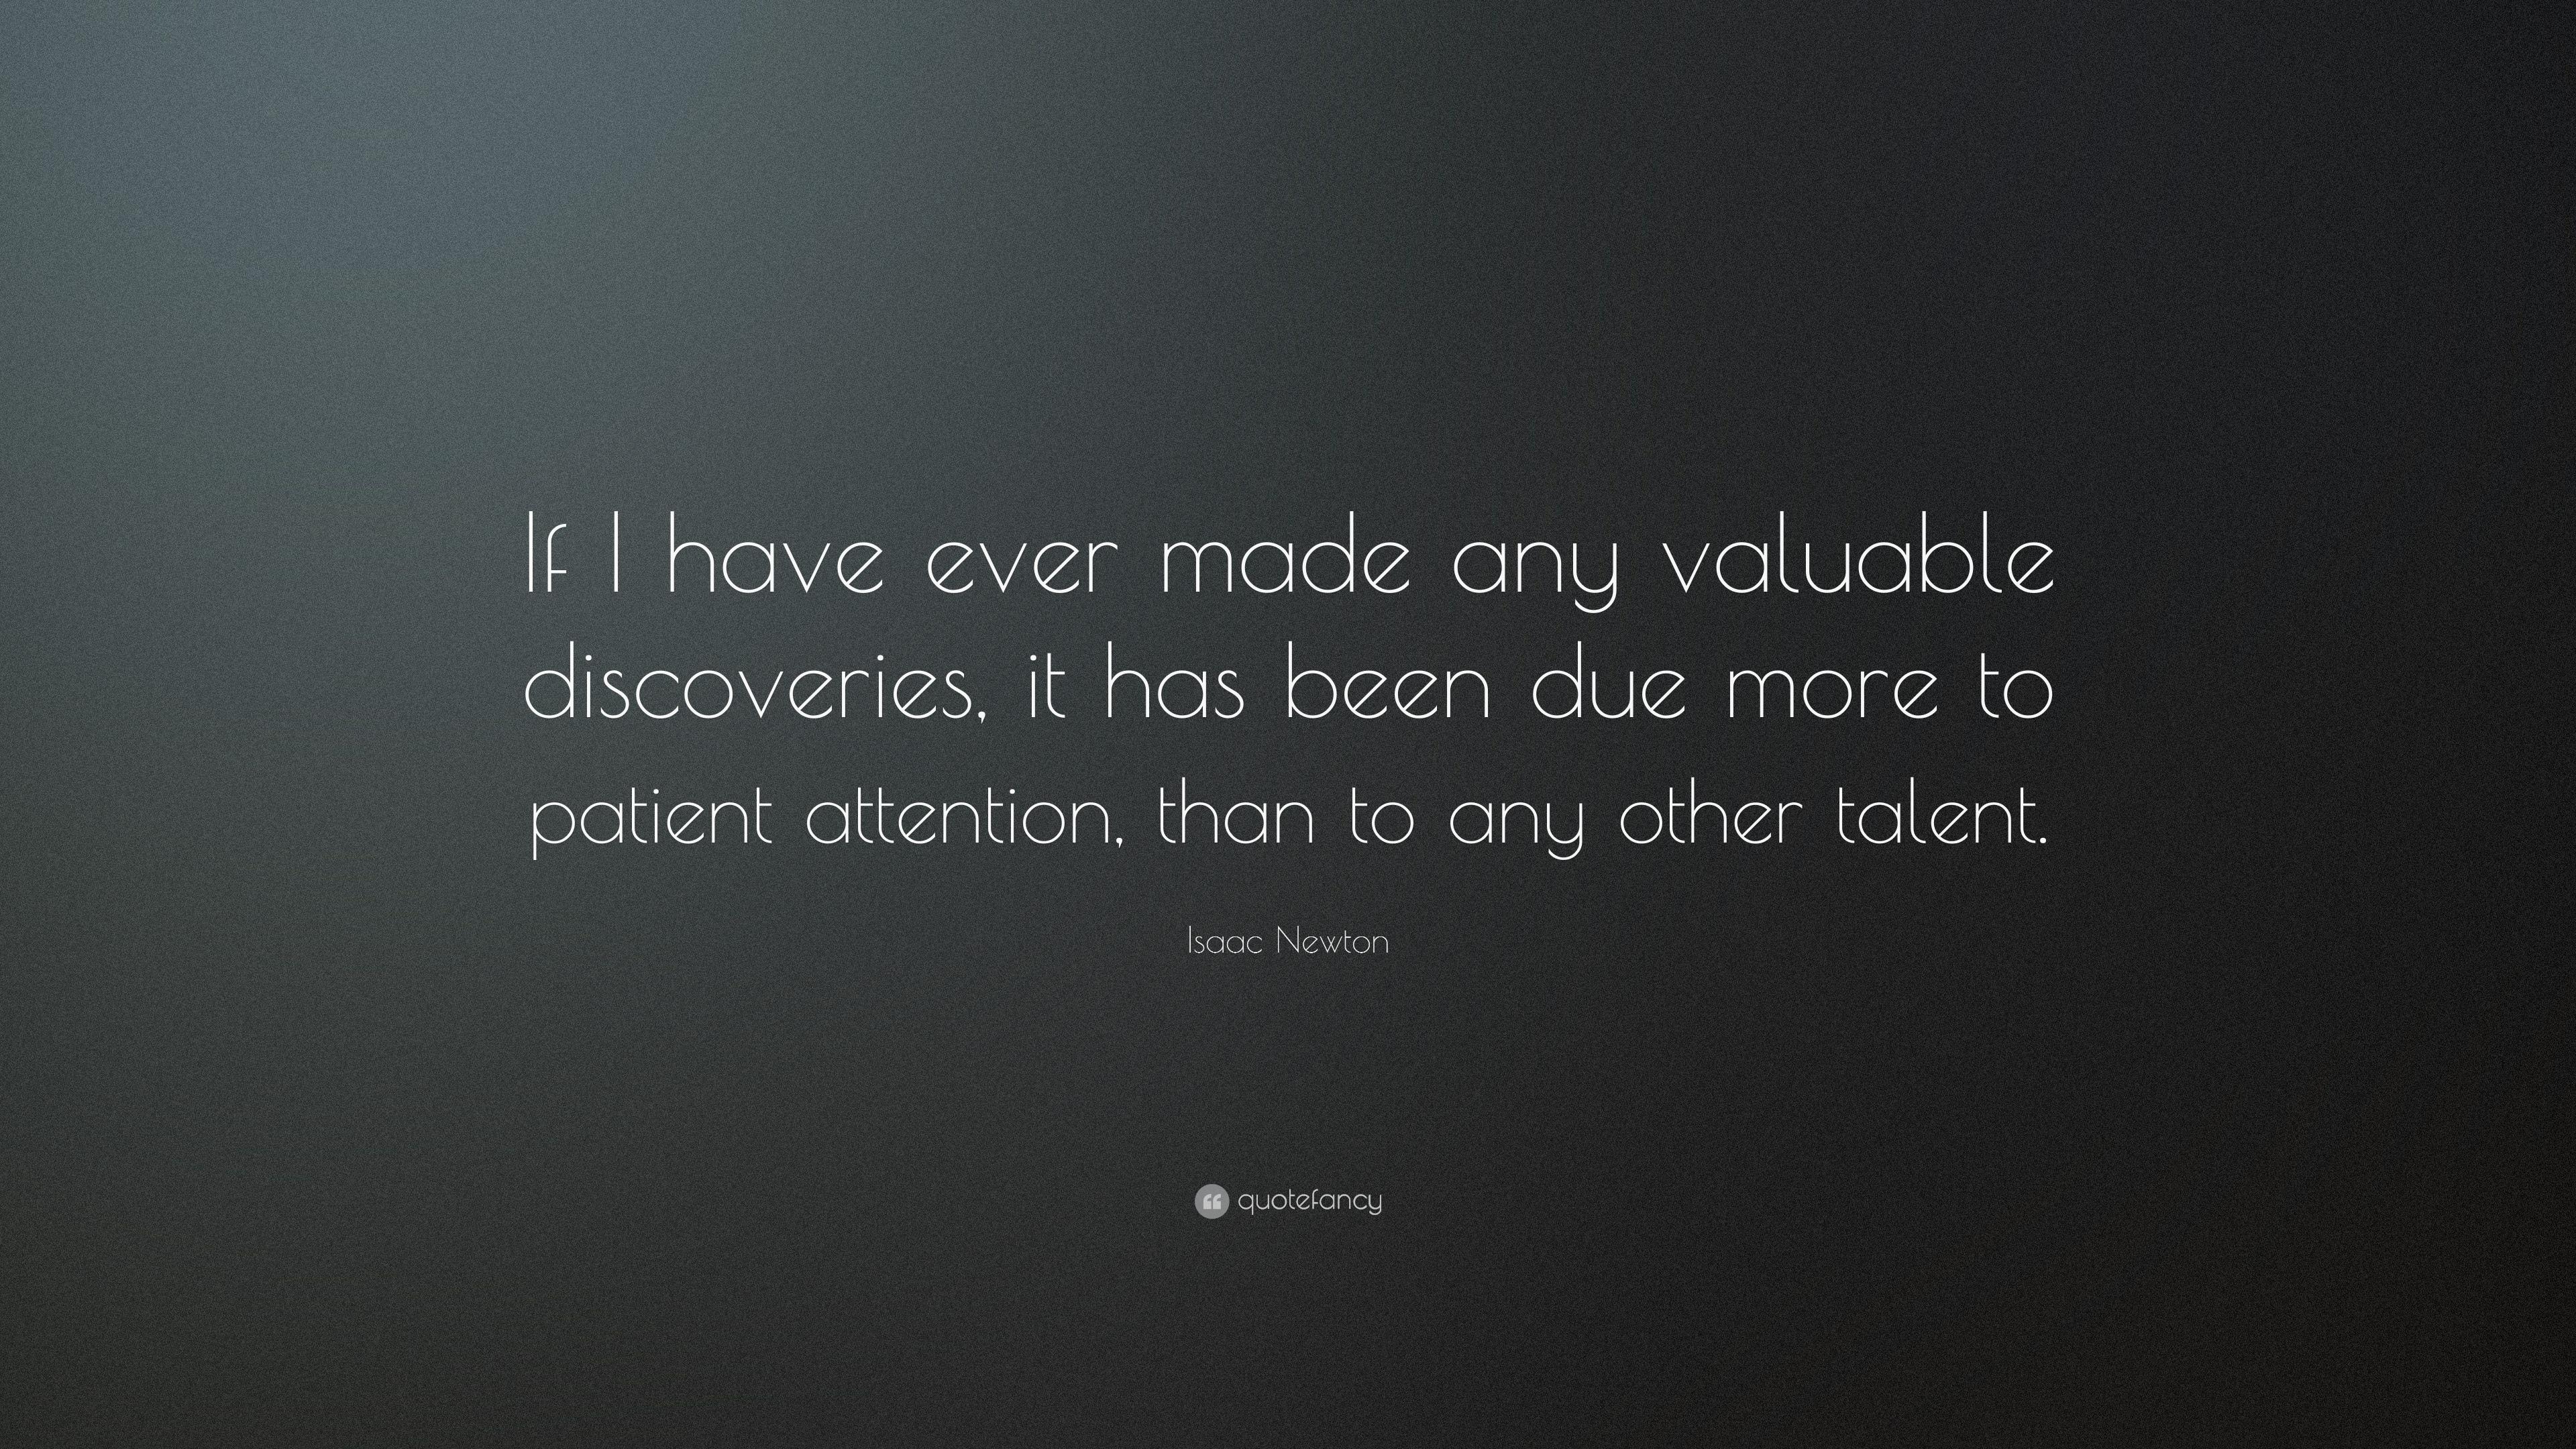 Isaac Newton Quote: “If I have ever made any valuable discoveries